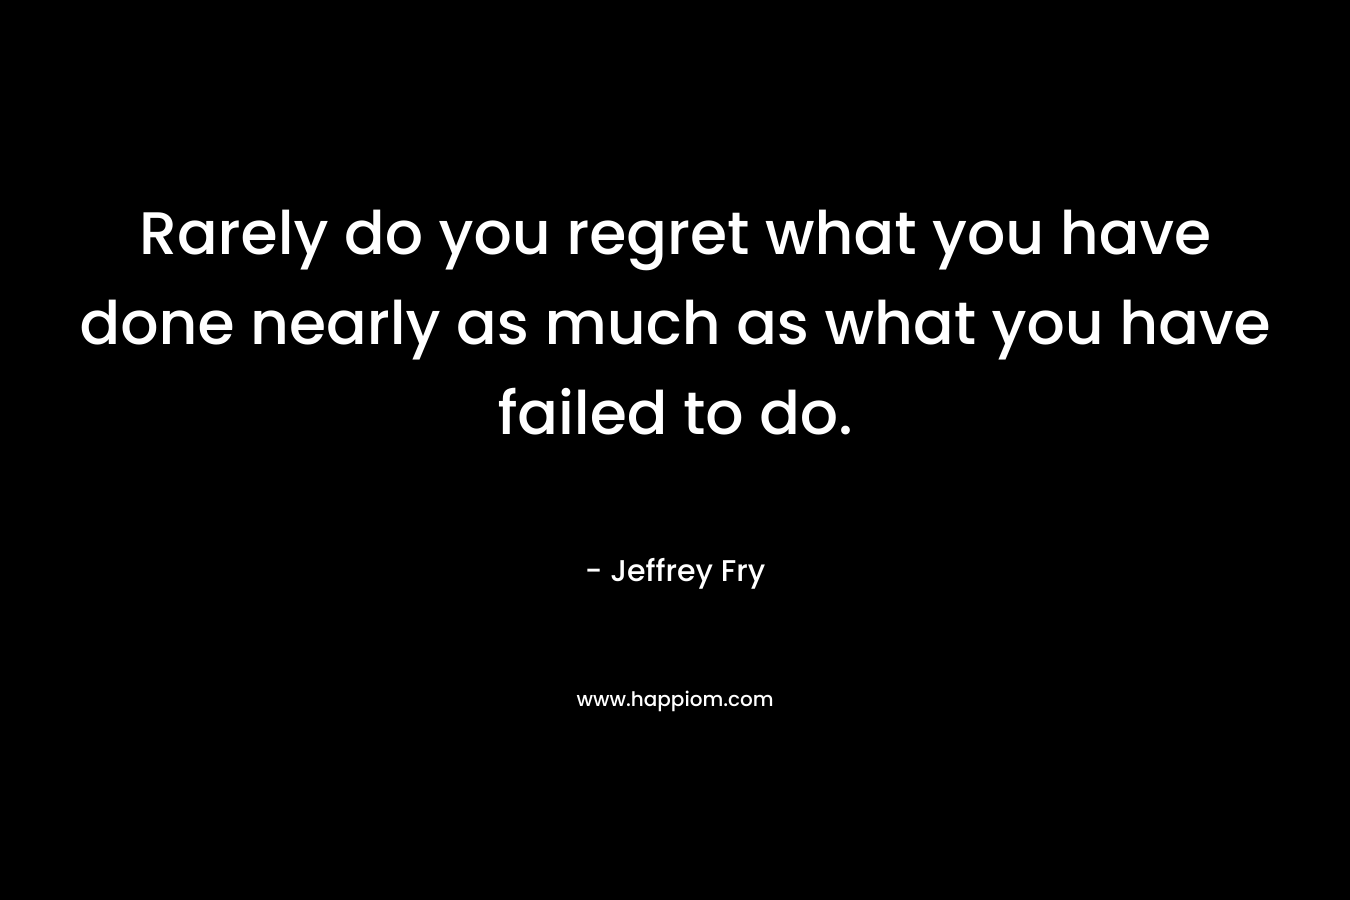 Rarely do you regret what you have done nearly as much as what you have failed to do. – Jeffrey Fry